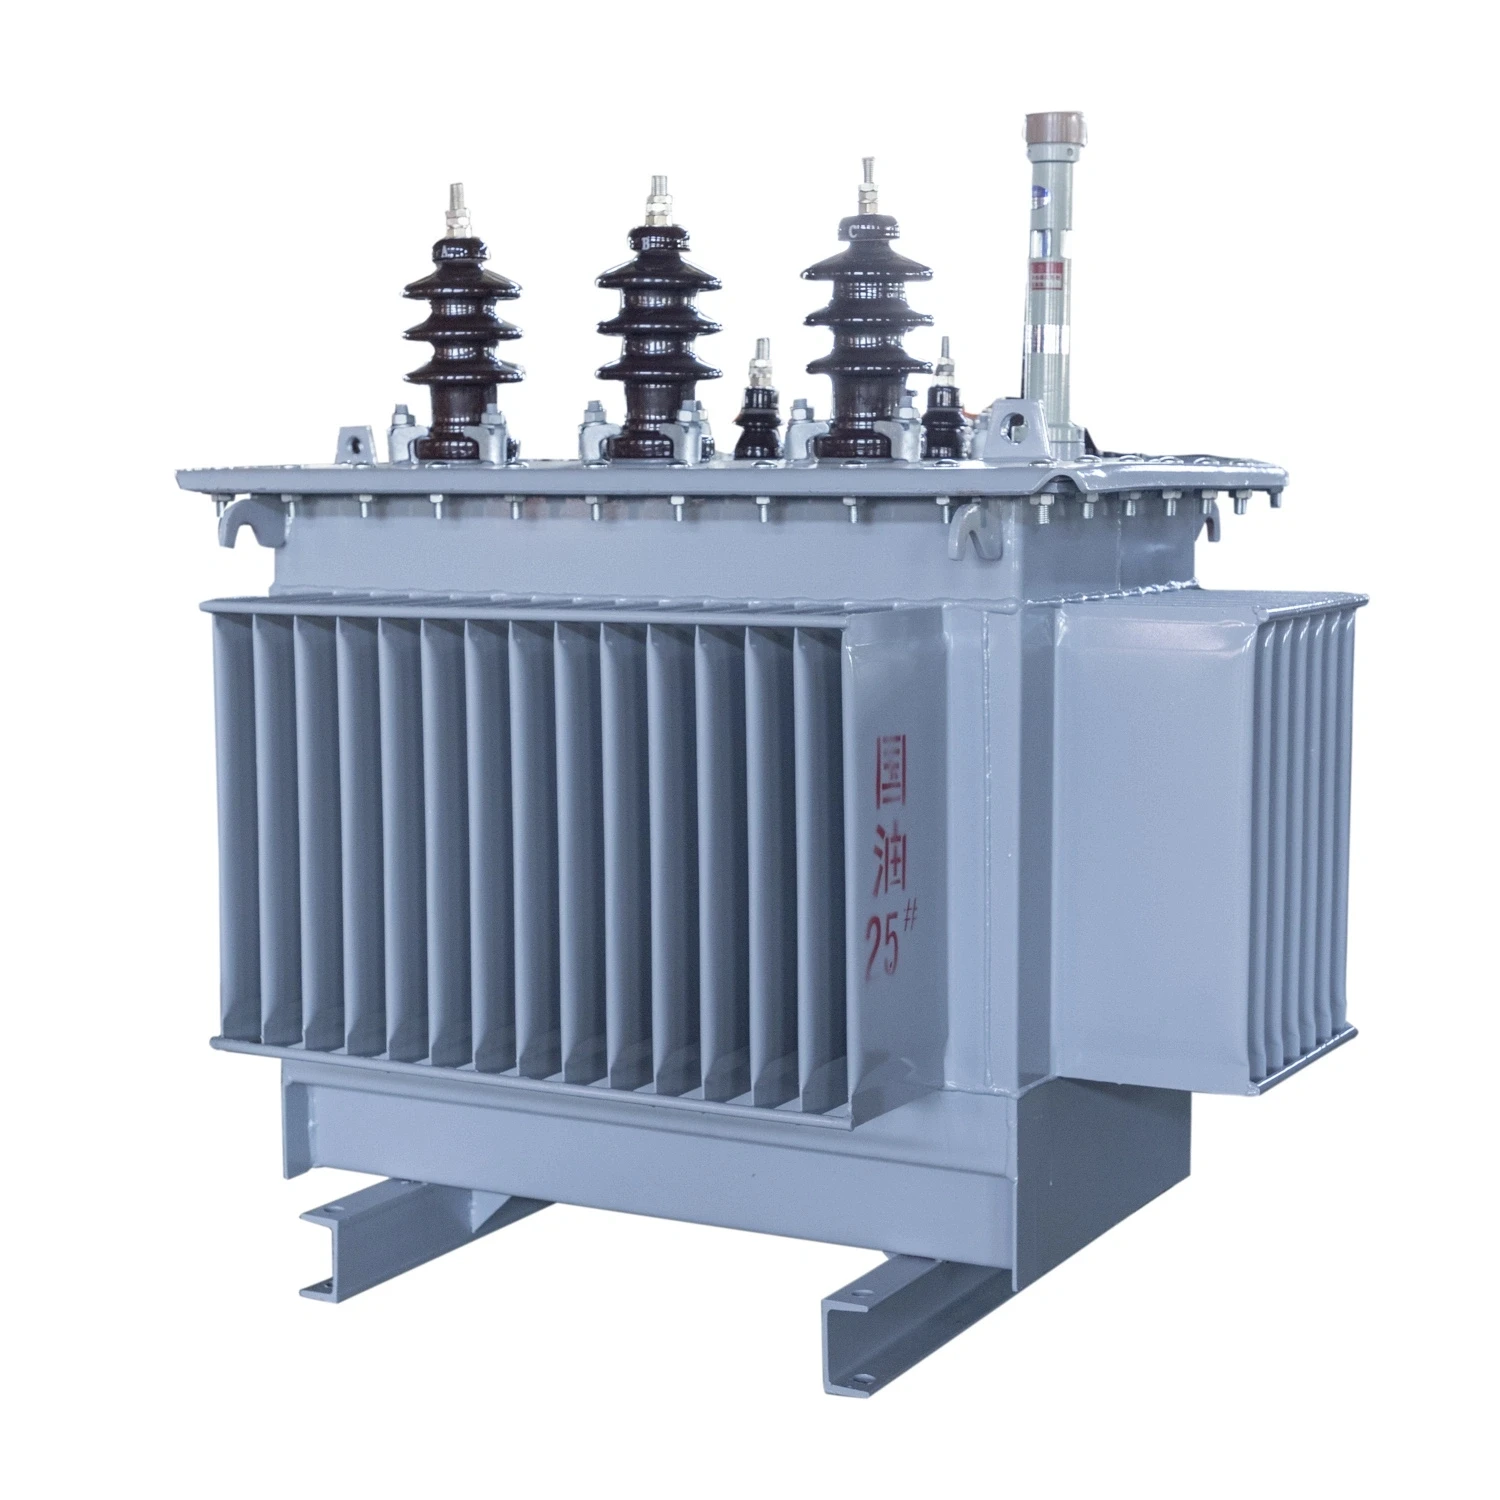 YIFA S11-M series 10kV omniseal double winding unexcited voltage regulated distribution 3 phase oil immersed transformer 5000kva